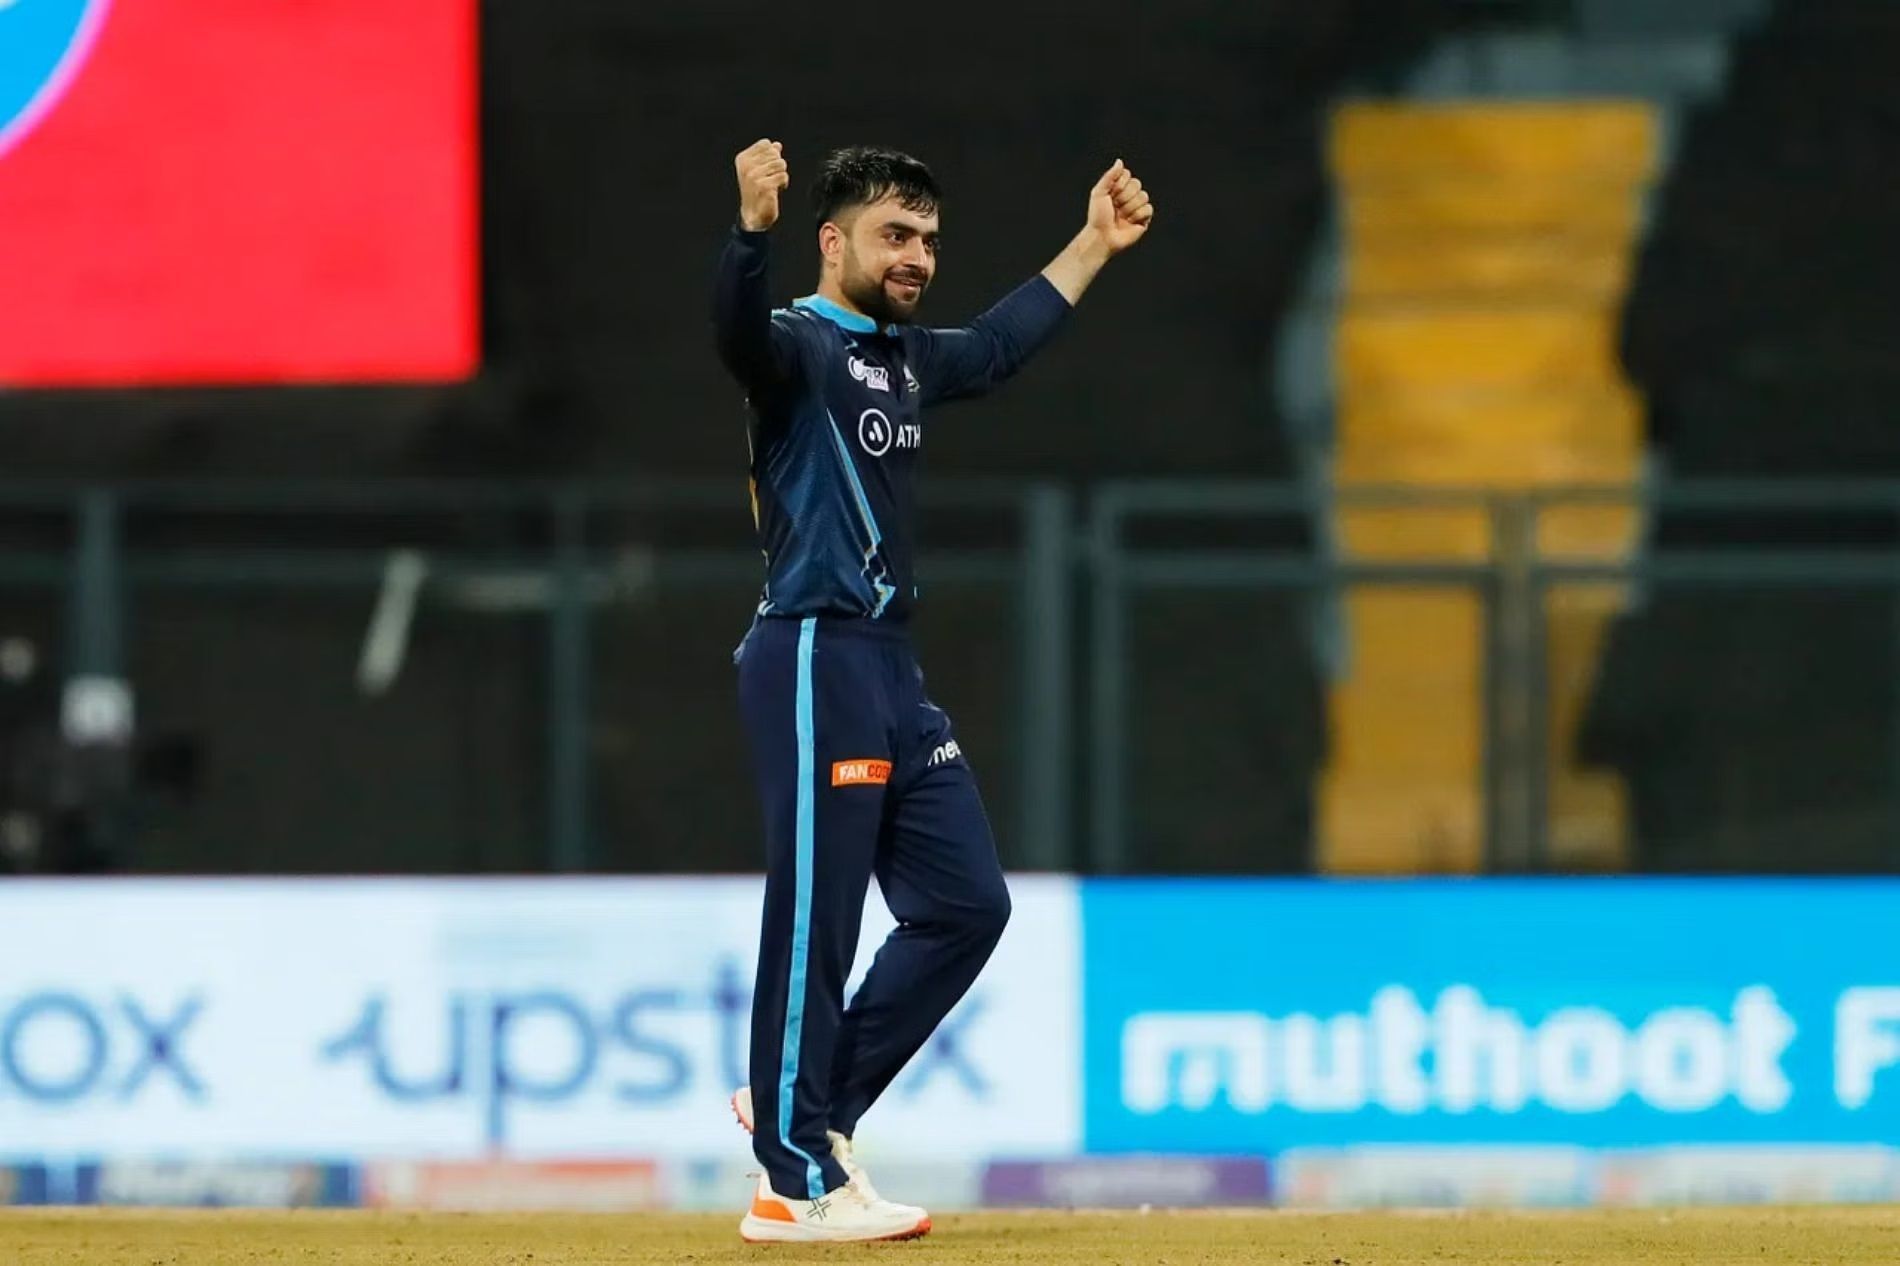 Rashid Khan is expected to lead the Gujarat Titans&#039; bowling attack. [P/C: iplt20.com]